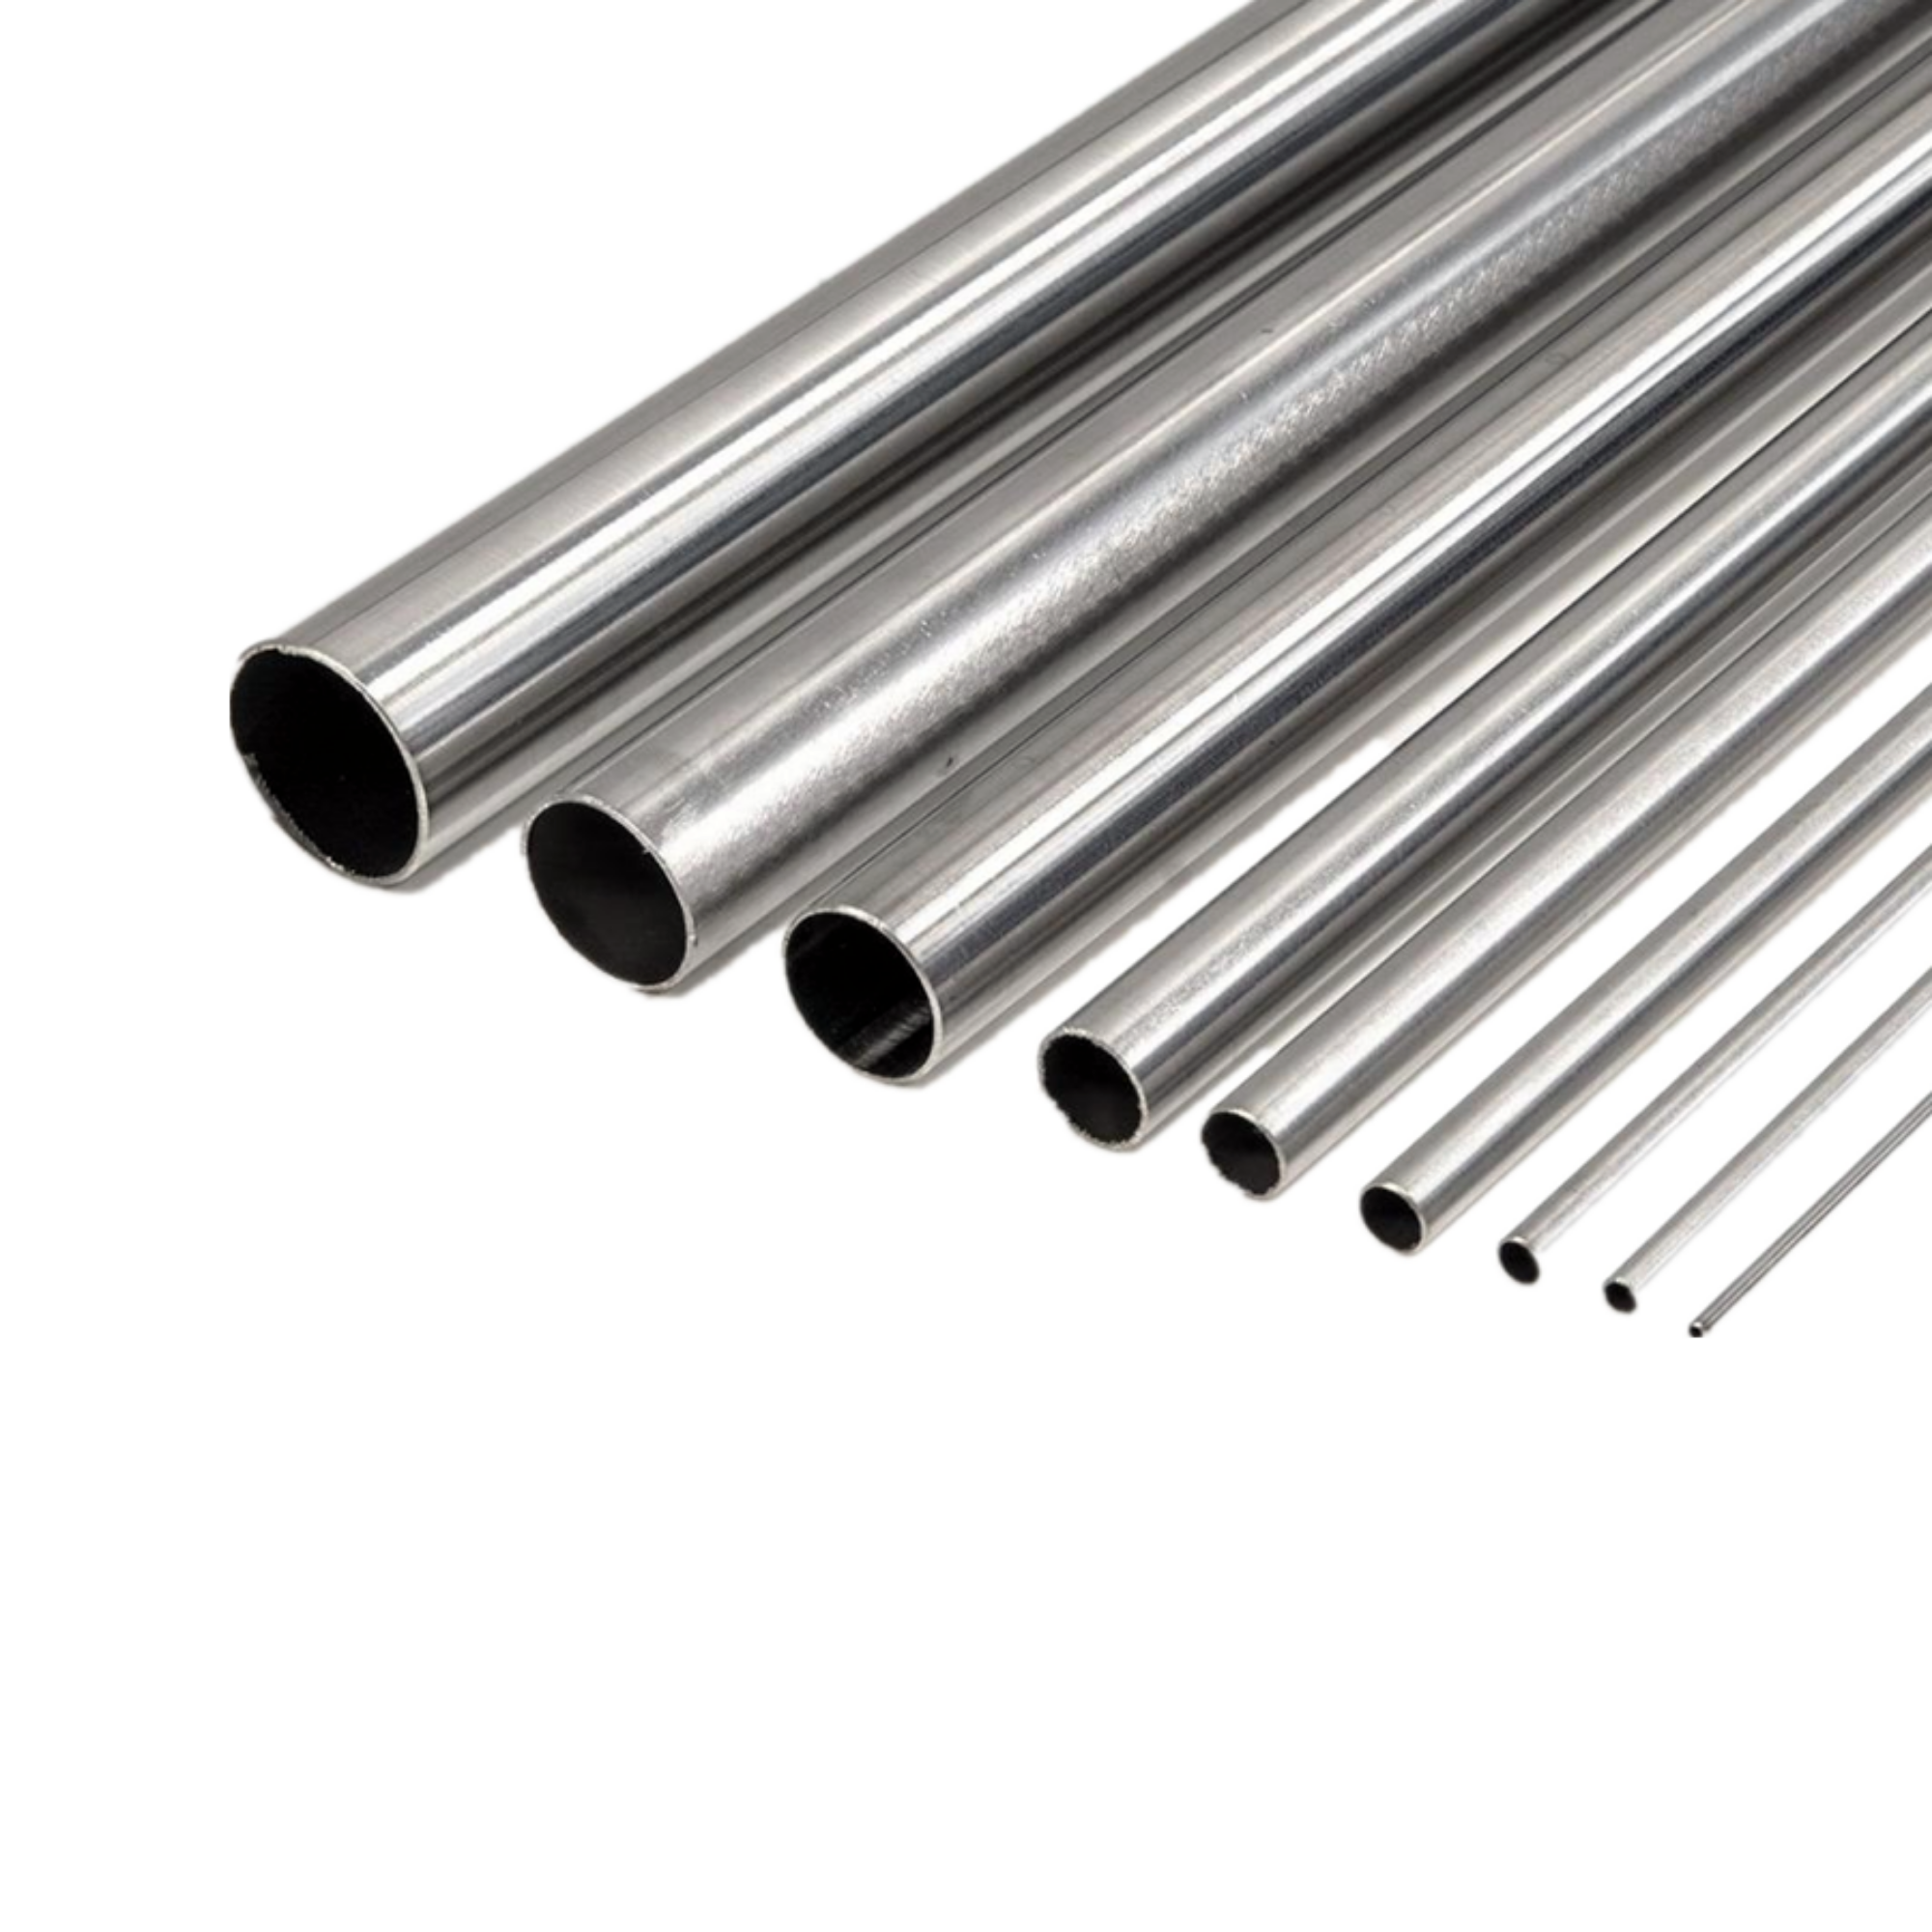 Welded 201 304 304l 316l 316 stainless steel pipe 25mm 50mm stainless steel pipe